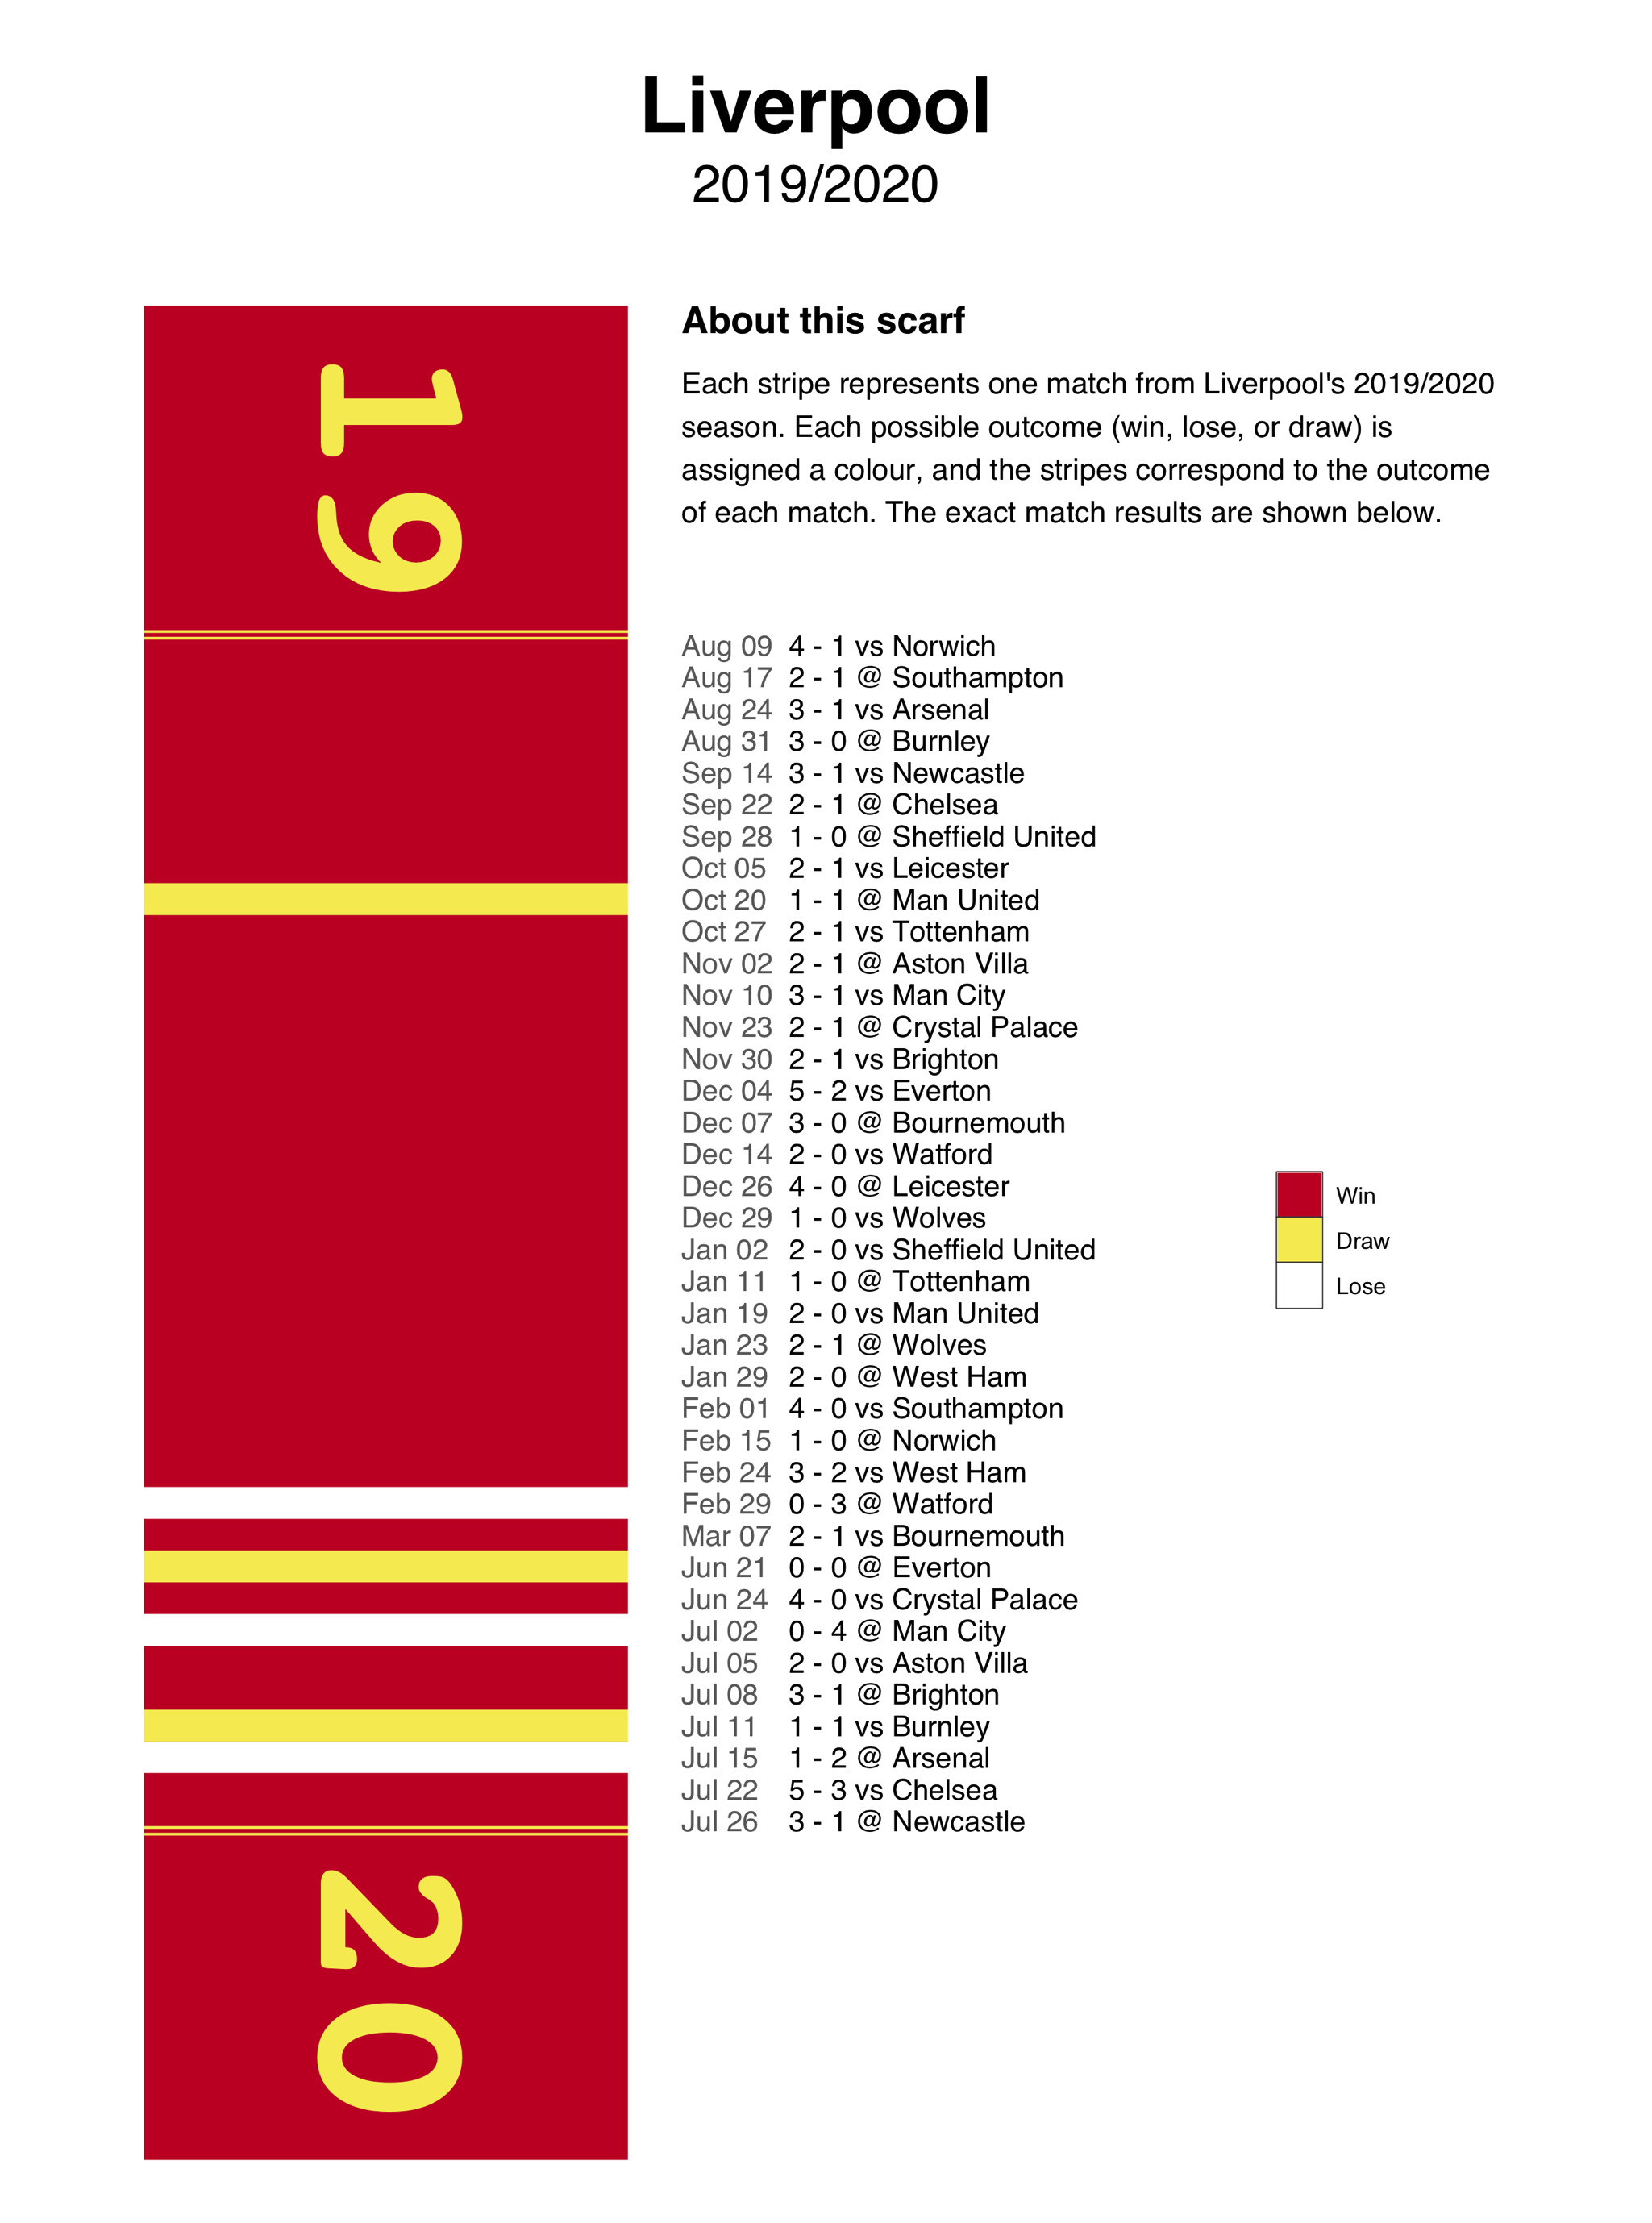 A schematic legend showing how each line of the scarf pattern lines with a match from Liverpool's season. The winning matches correspond to a red stripe, the draws correspond to a yellow stripe, and each loss corresponds to a white stripe.